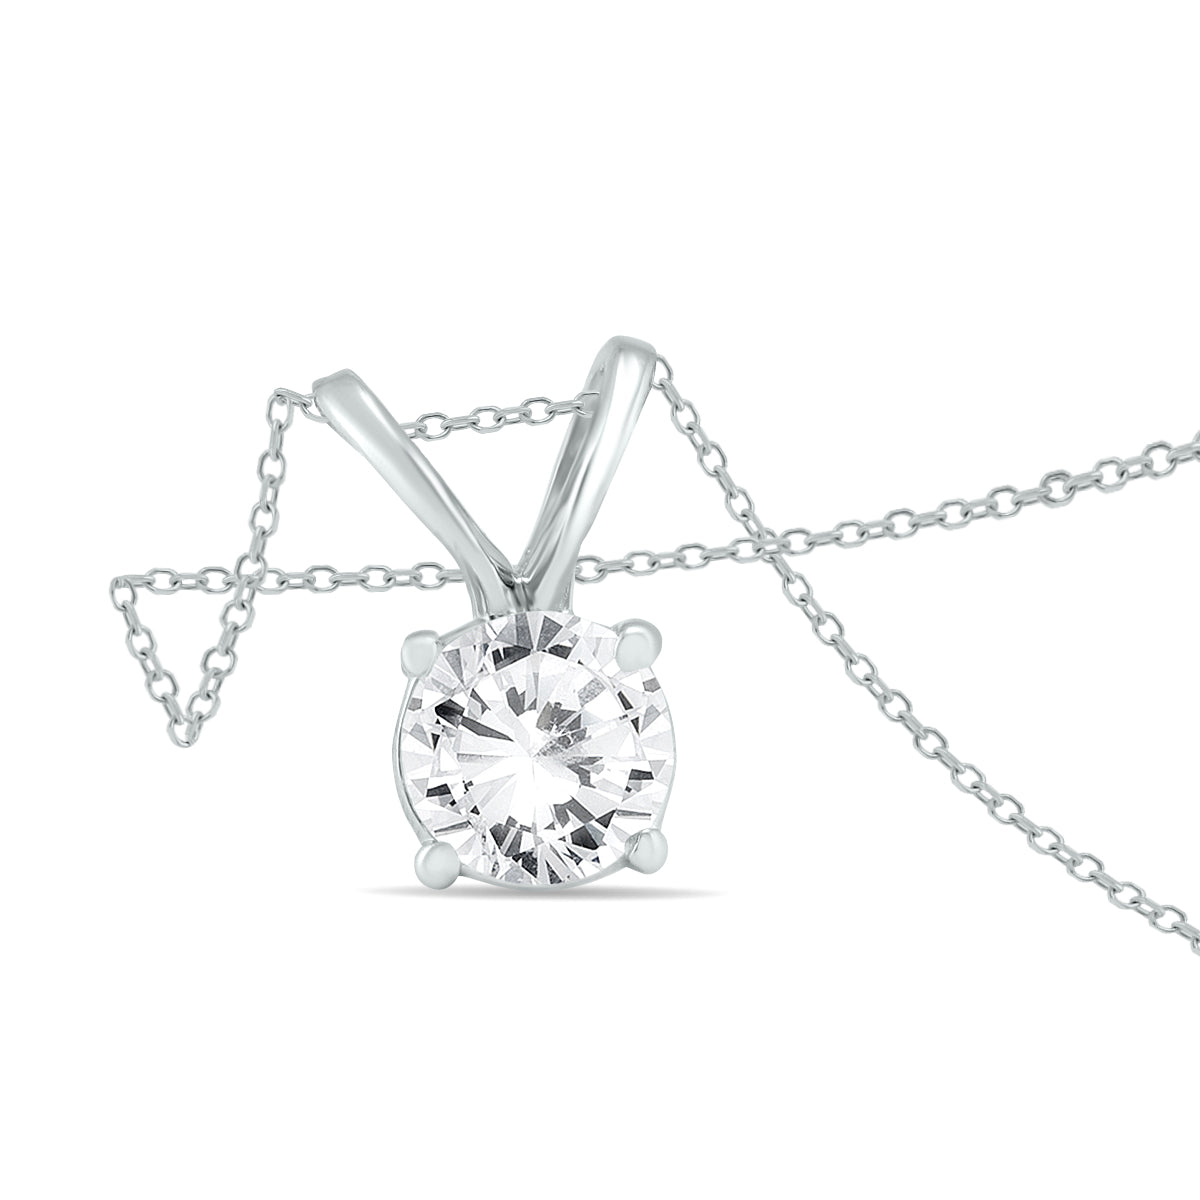 Sselects Premium Quality - 1 Carat Diamond Solitaire Pendant In 14k In White